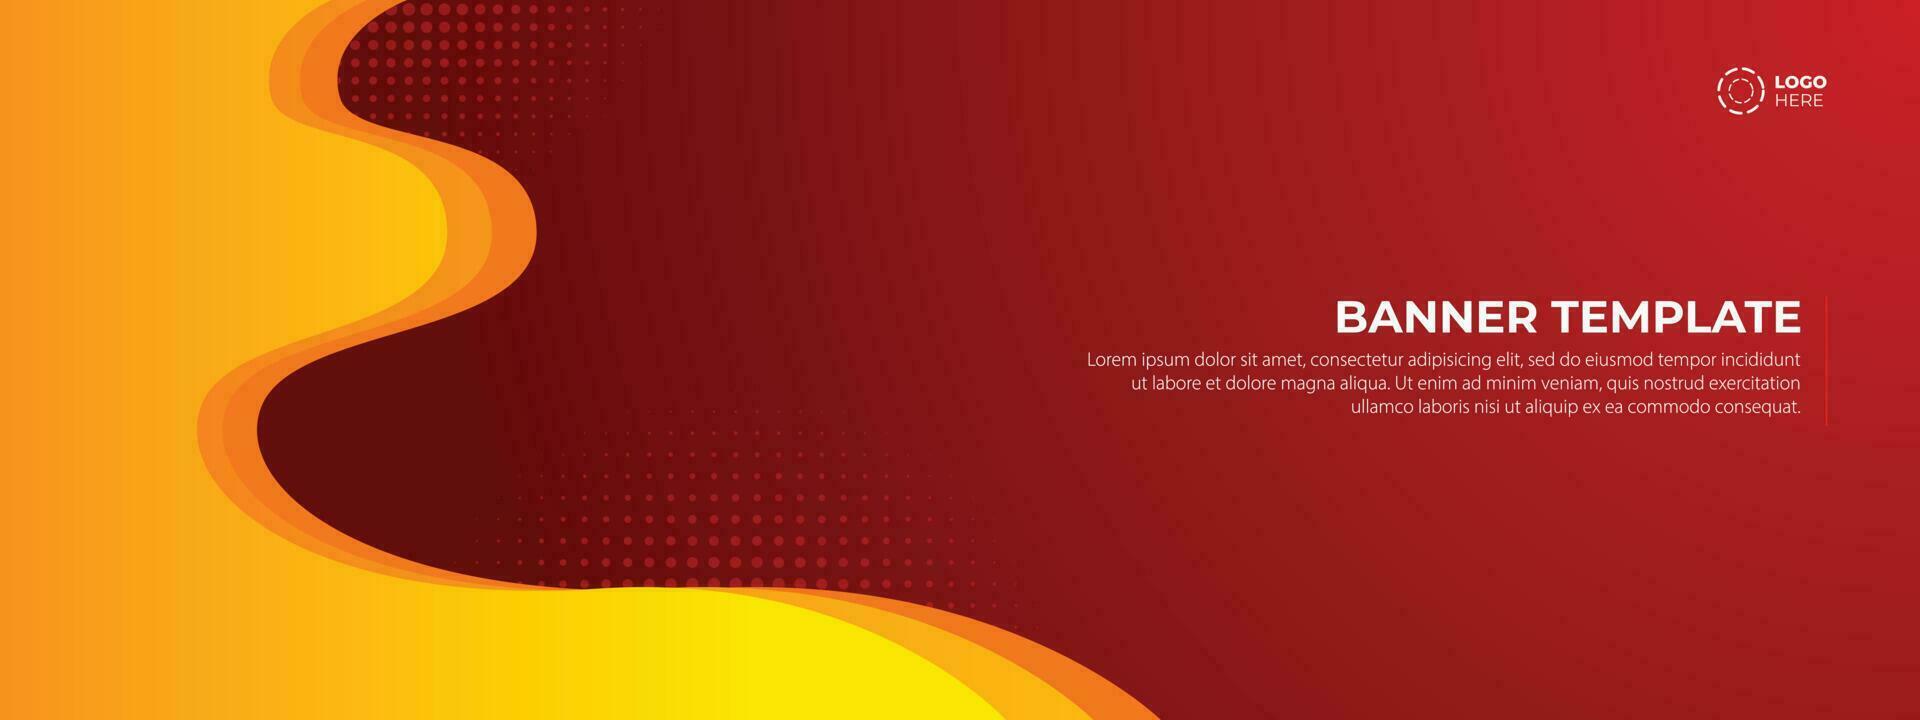 Abstract red and yellow fluid banner design vector